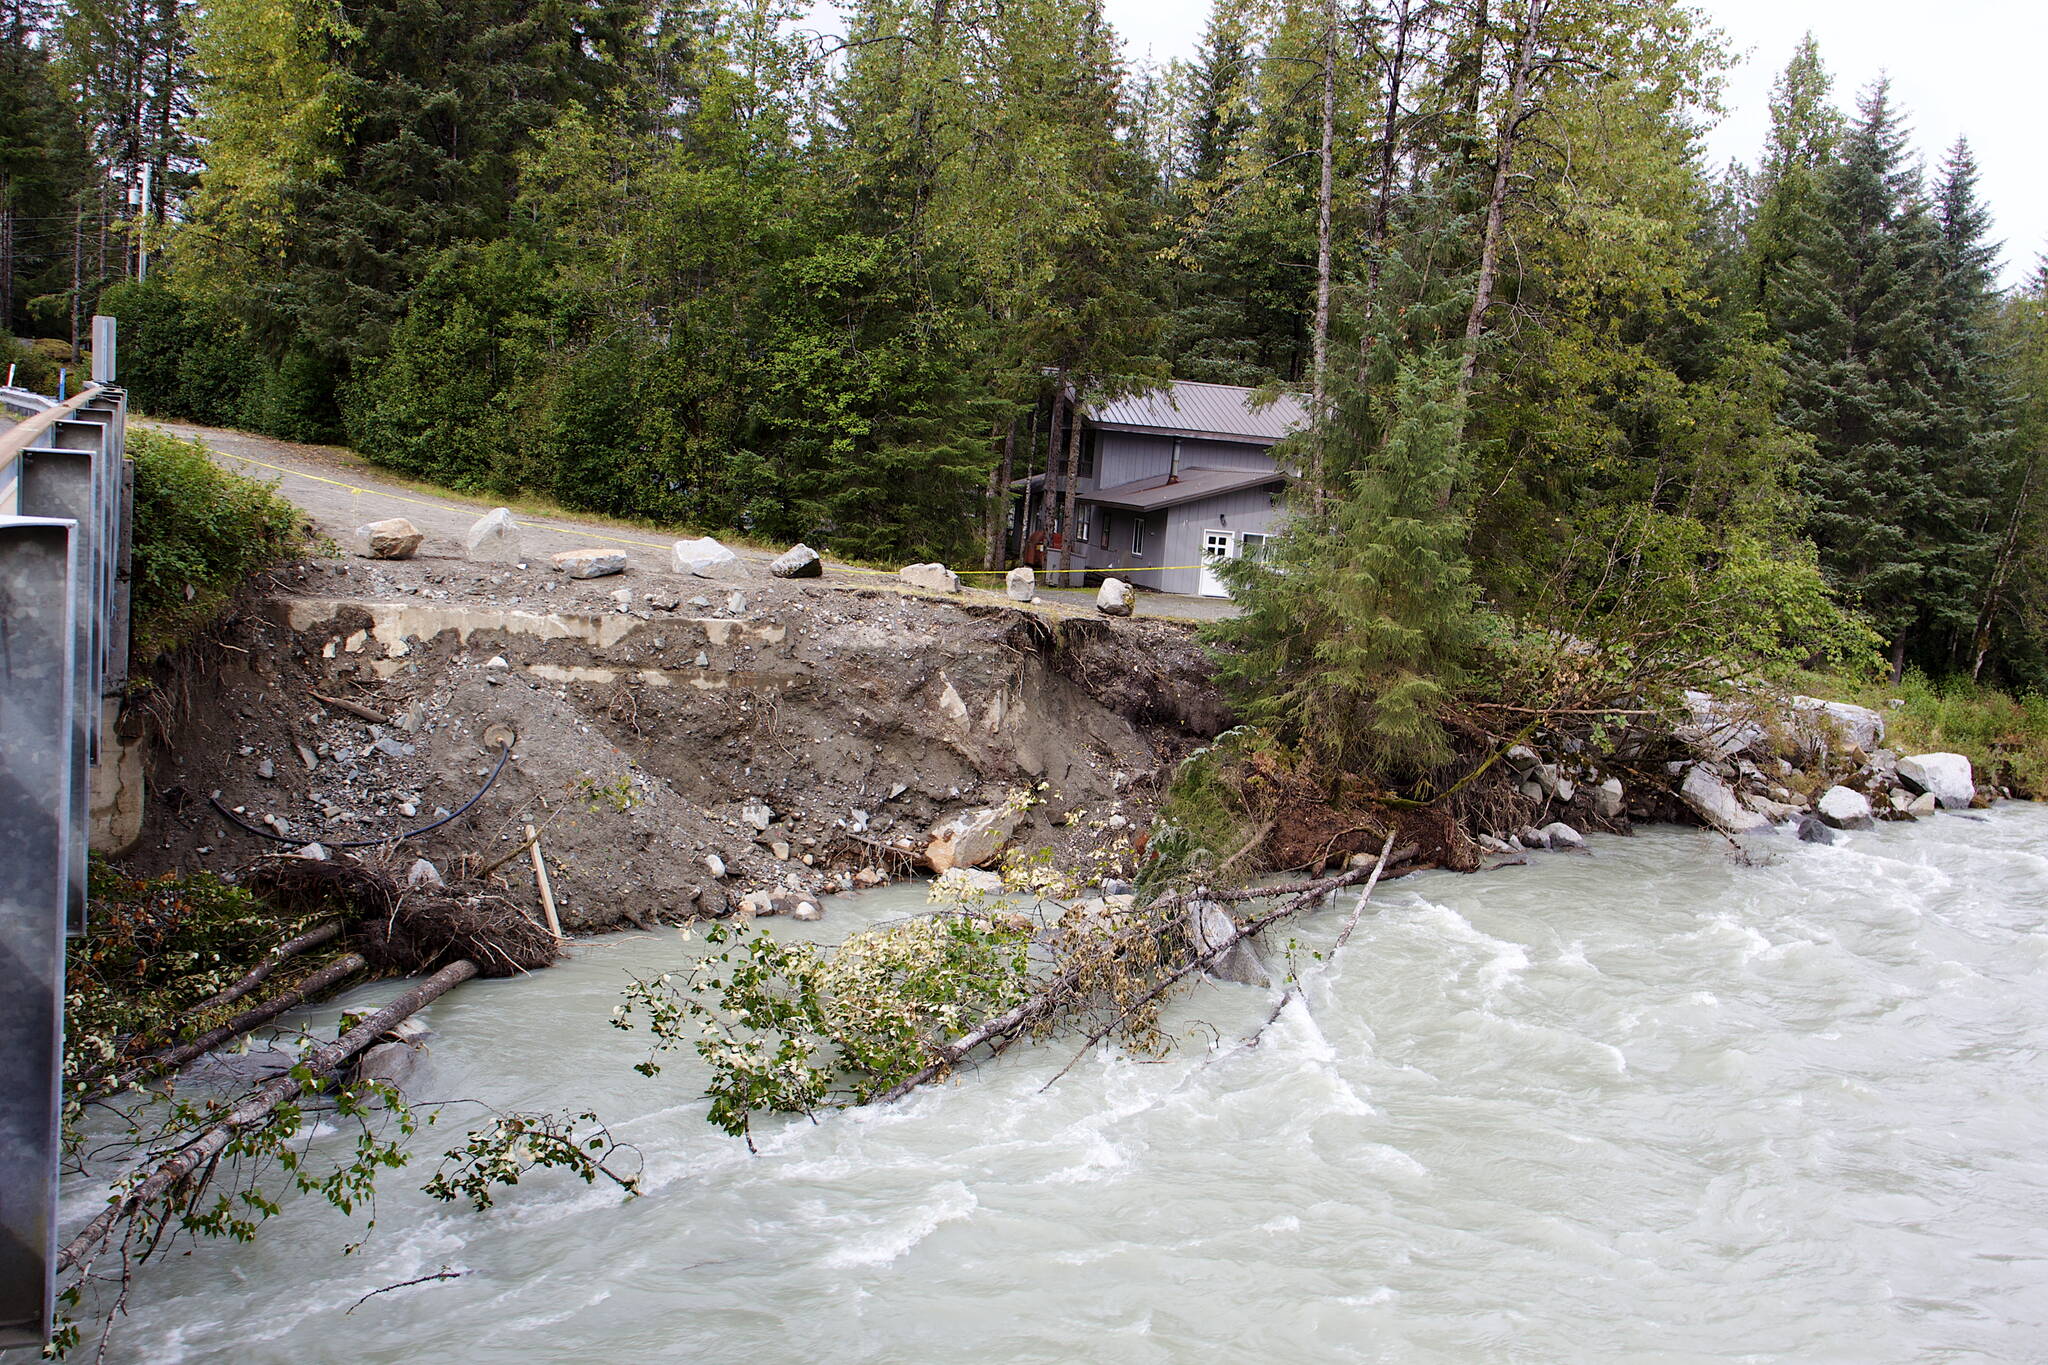 Trees lie in the Mendenhall River following last month’s record flooding that eroded massive sections of the riverbank, causing widespread property and environmental damage. (Mark Sabbatini / Juneau Empire)